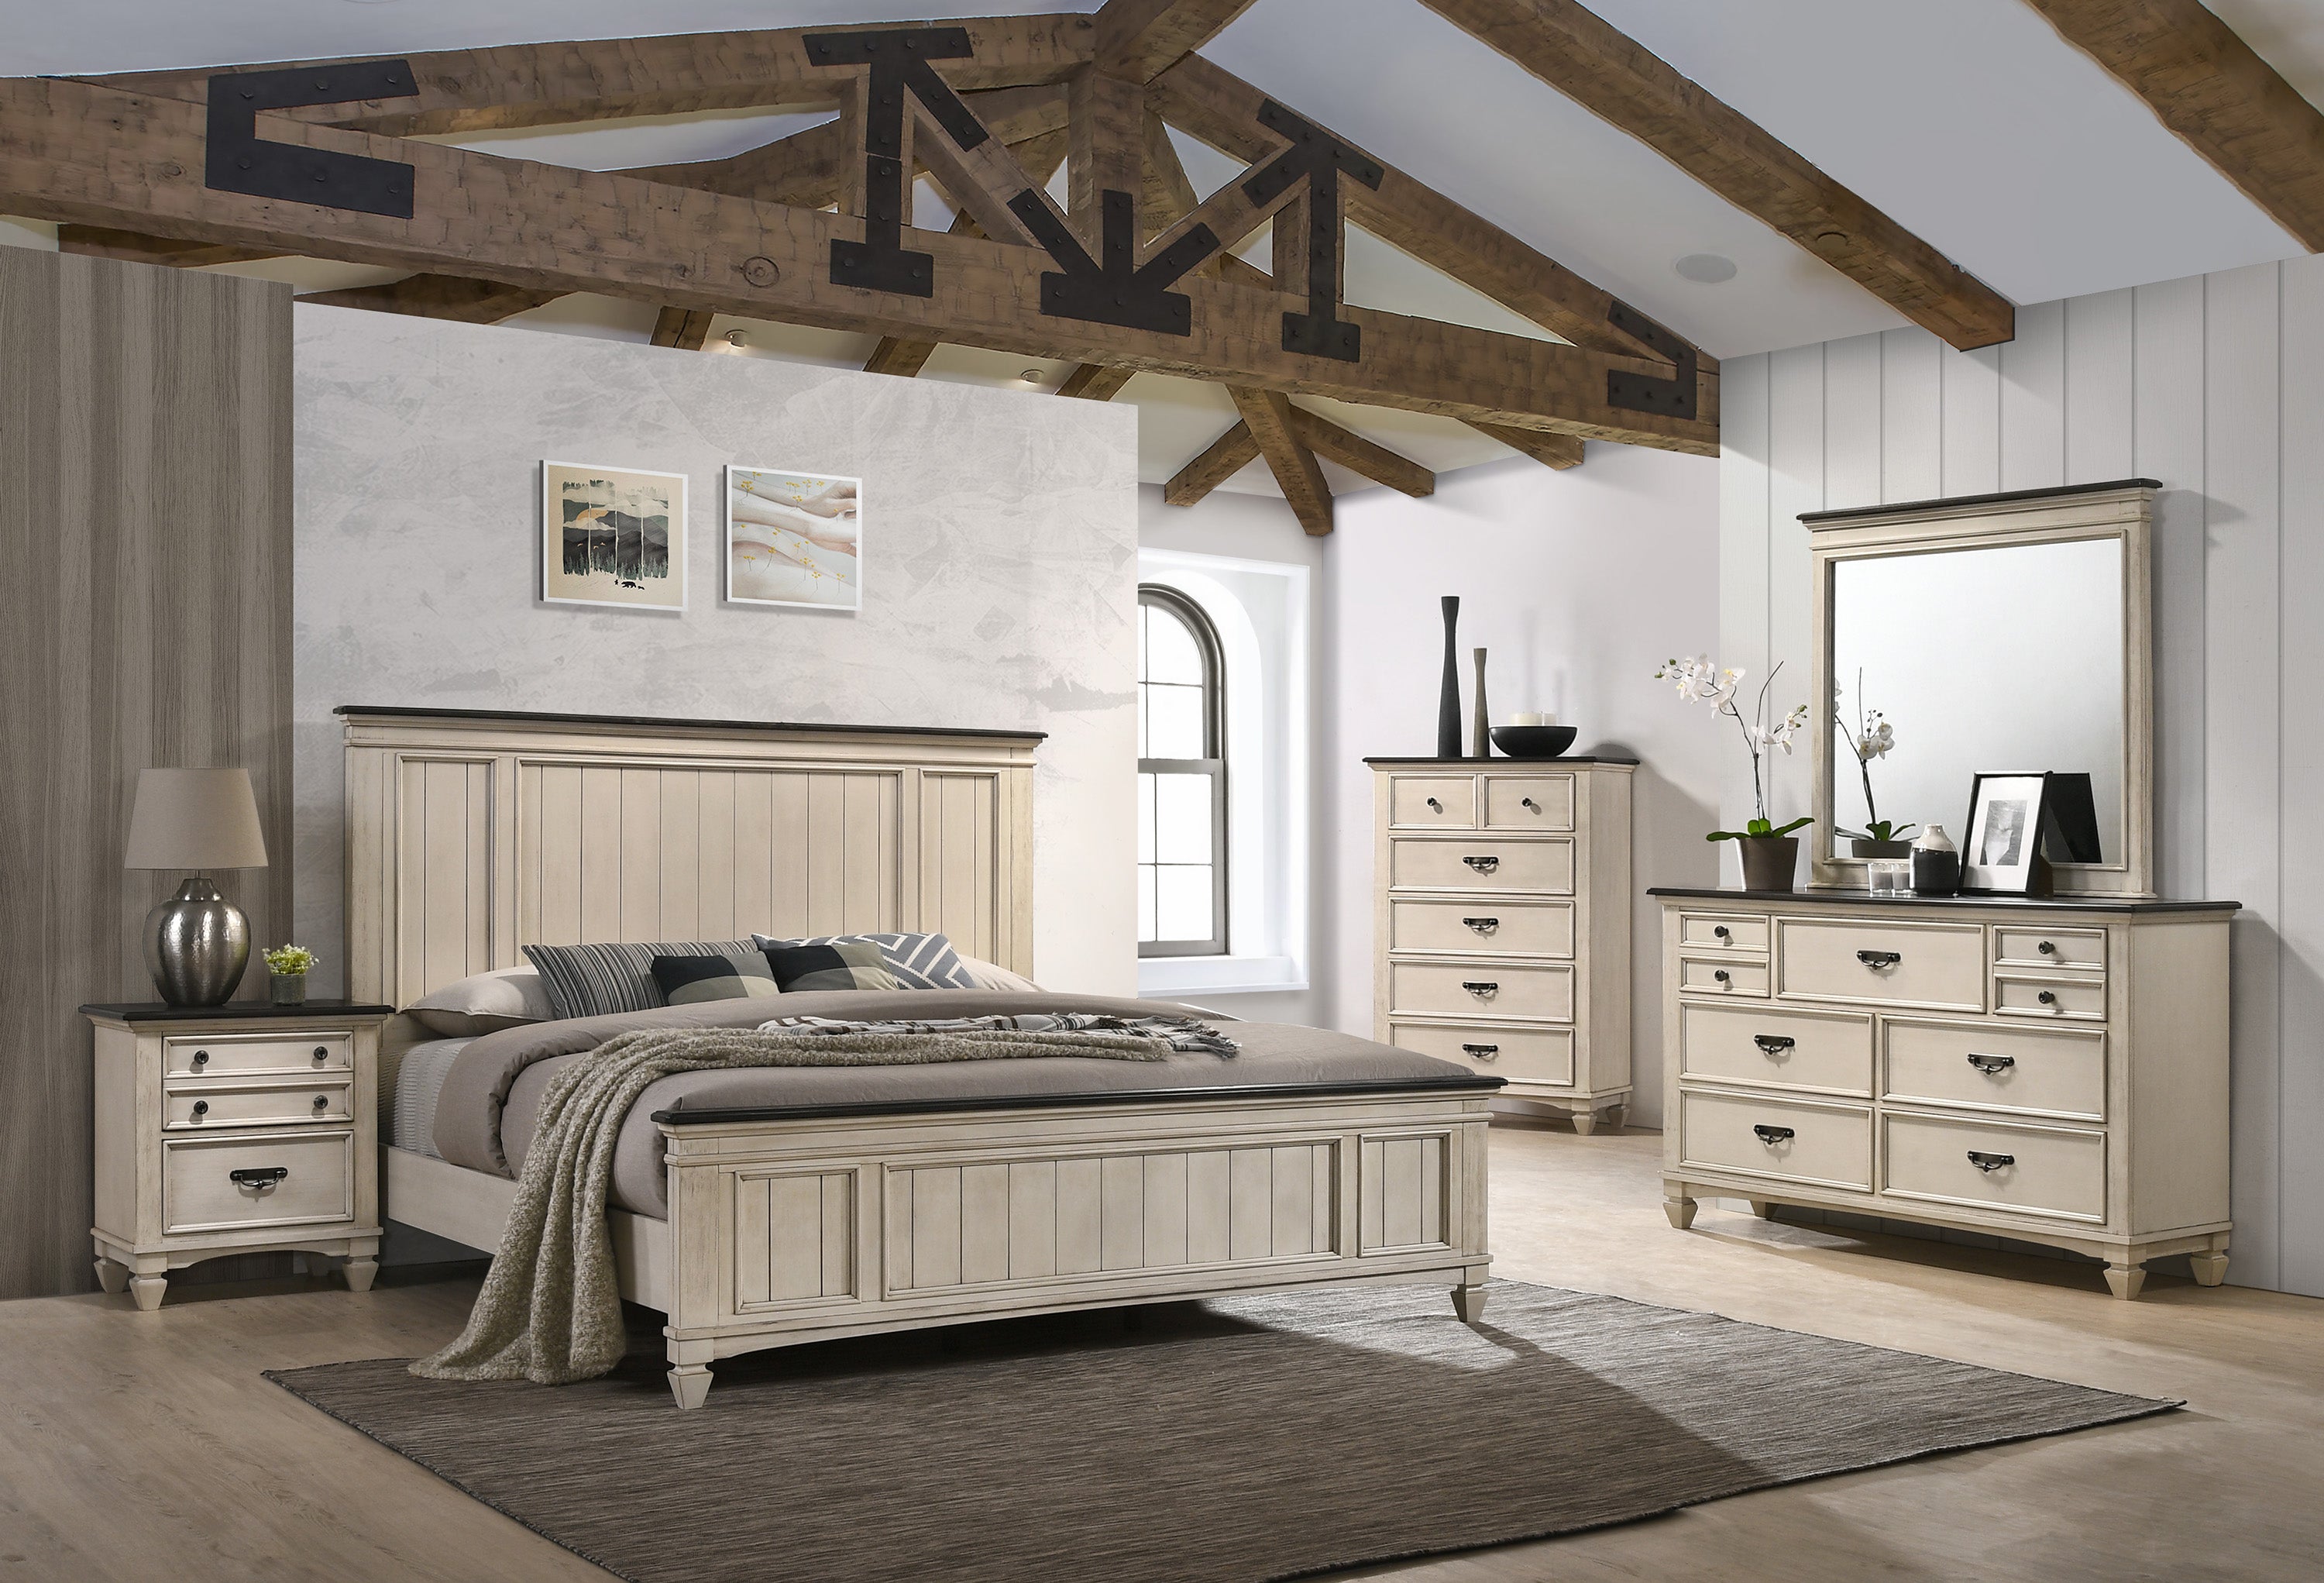 modern country bedroom furniture